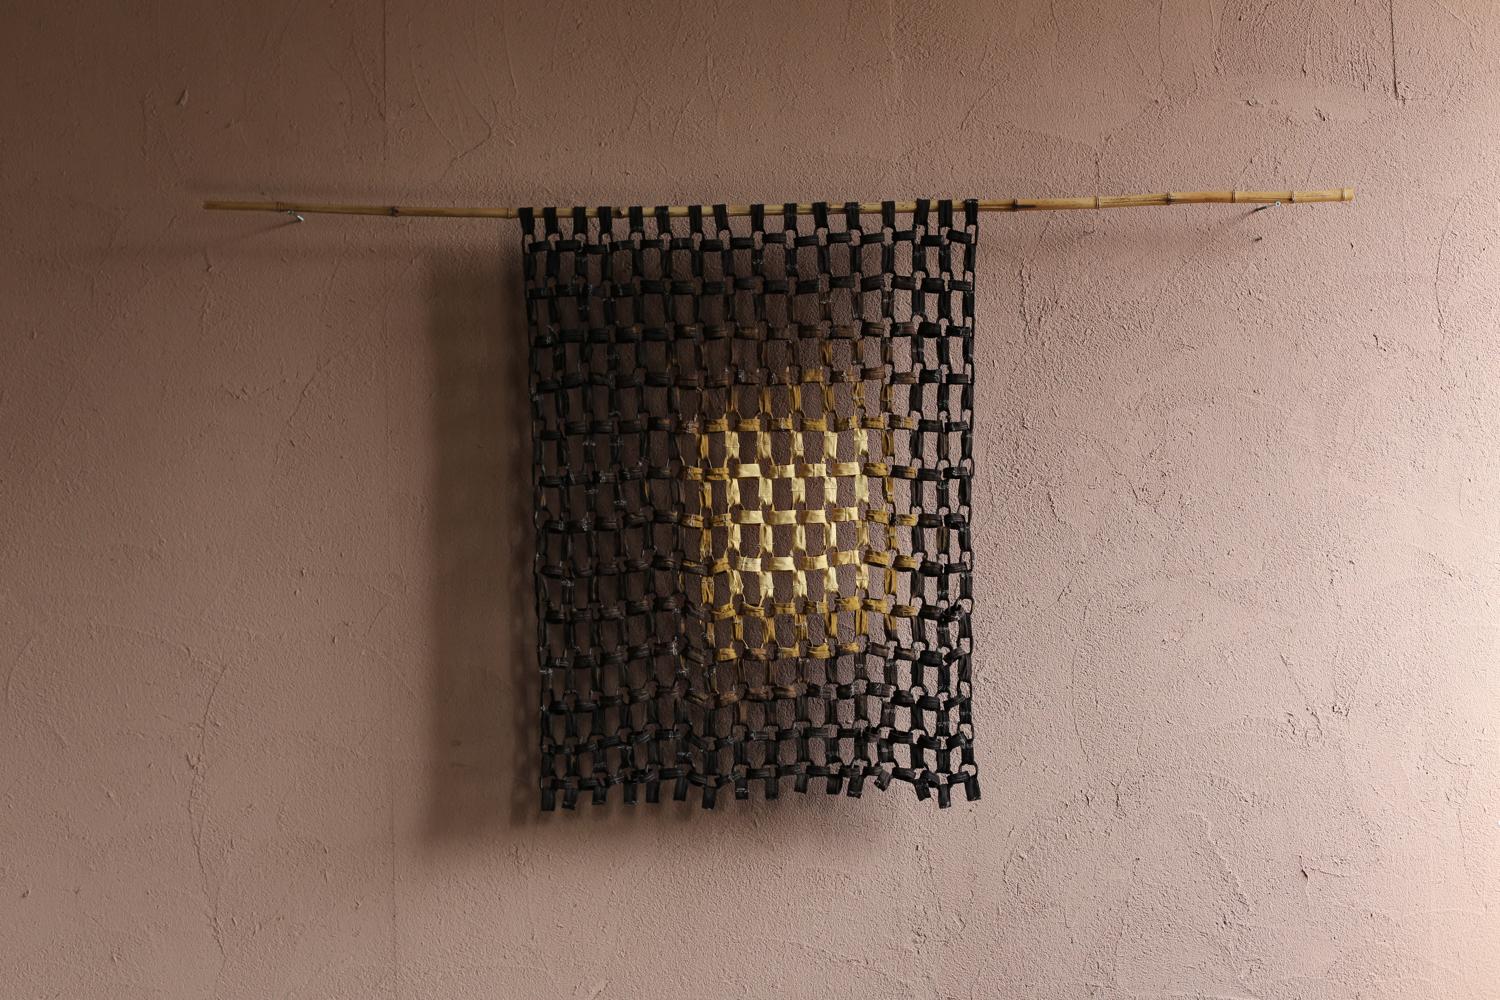 Title : KOMOREBI
Japan / 2021s 
Size : W 800 H 1000 mm

A work in which 580 linen parts are put together in the image of sunlight through the trees.
The materials are freshly woven linen washed and fine French linen.
The natural dyes are